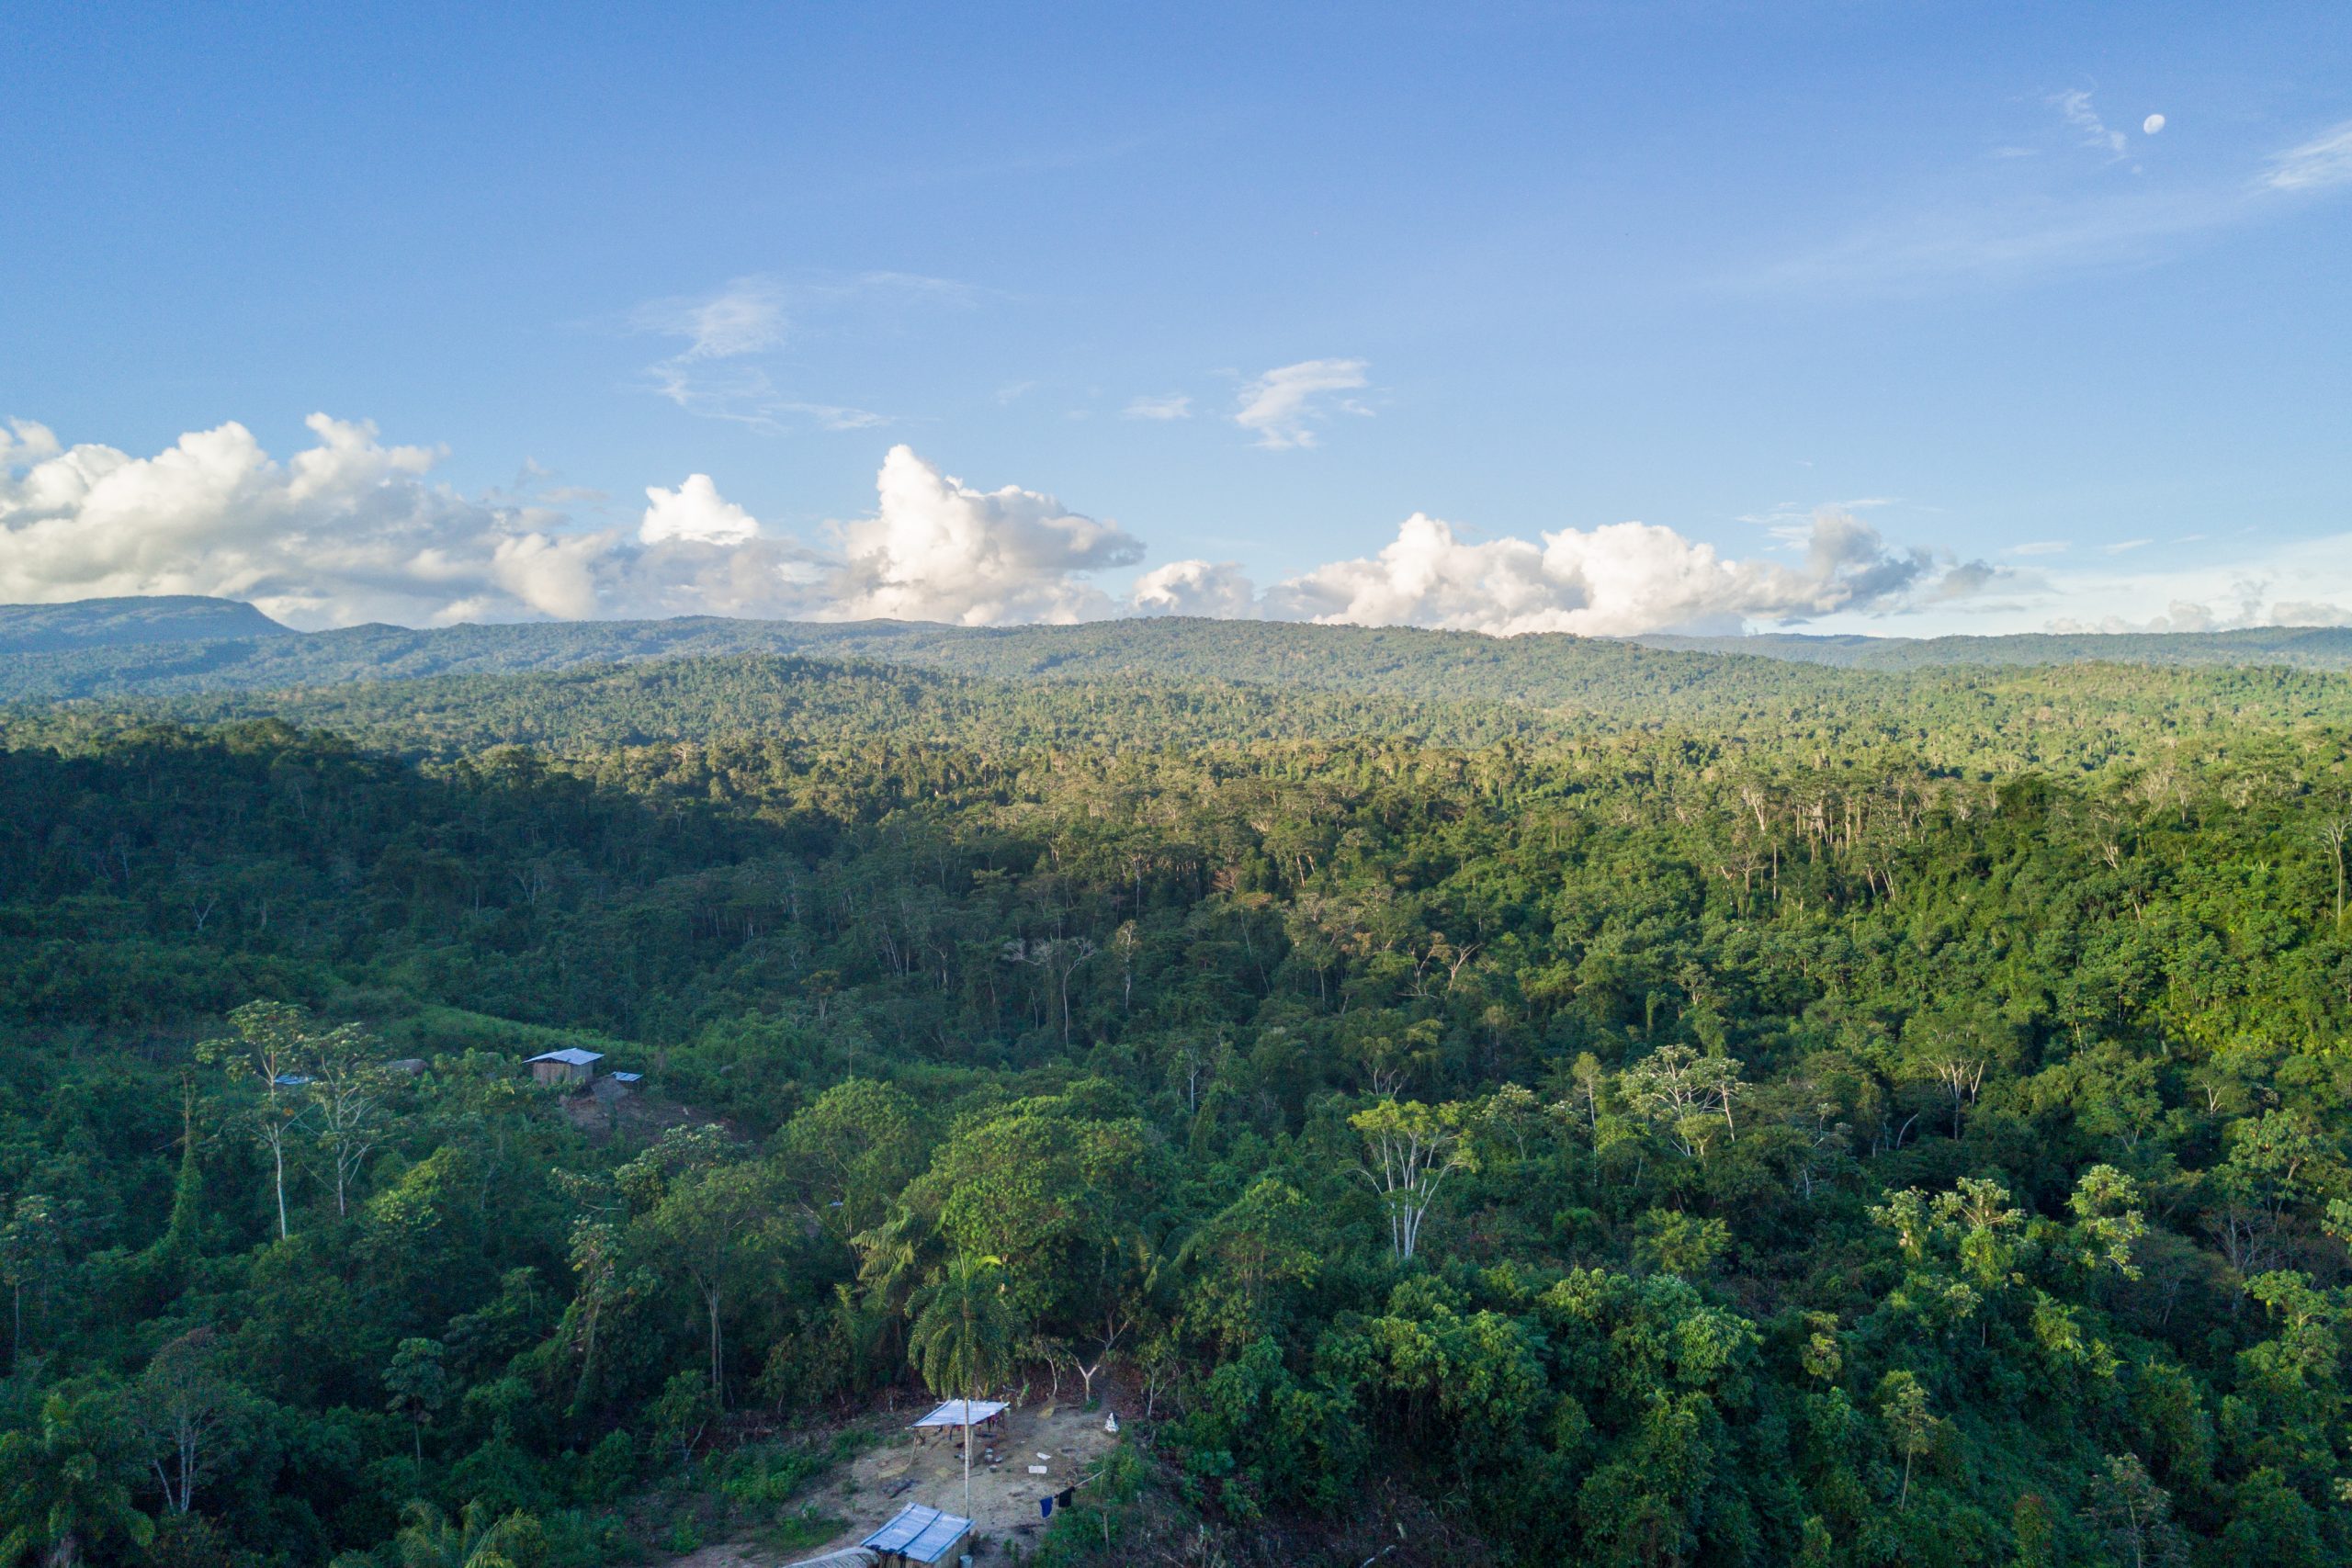 Aerial image of rainforest stretching to the horizon behind a small village.